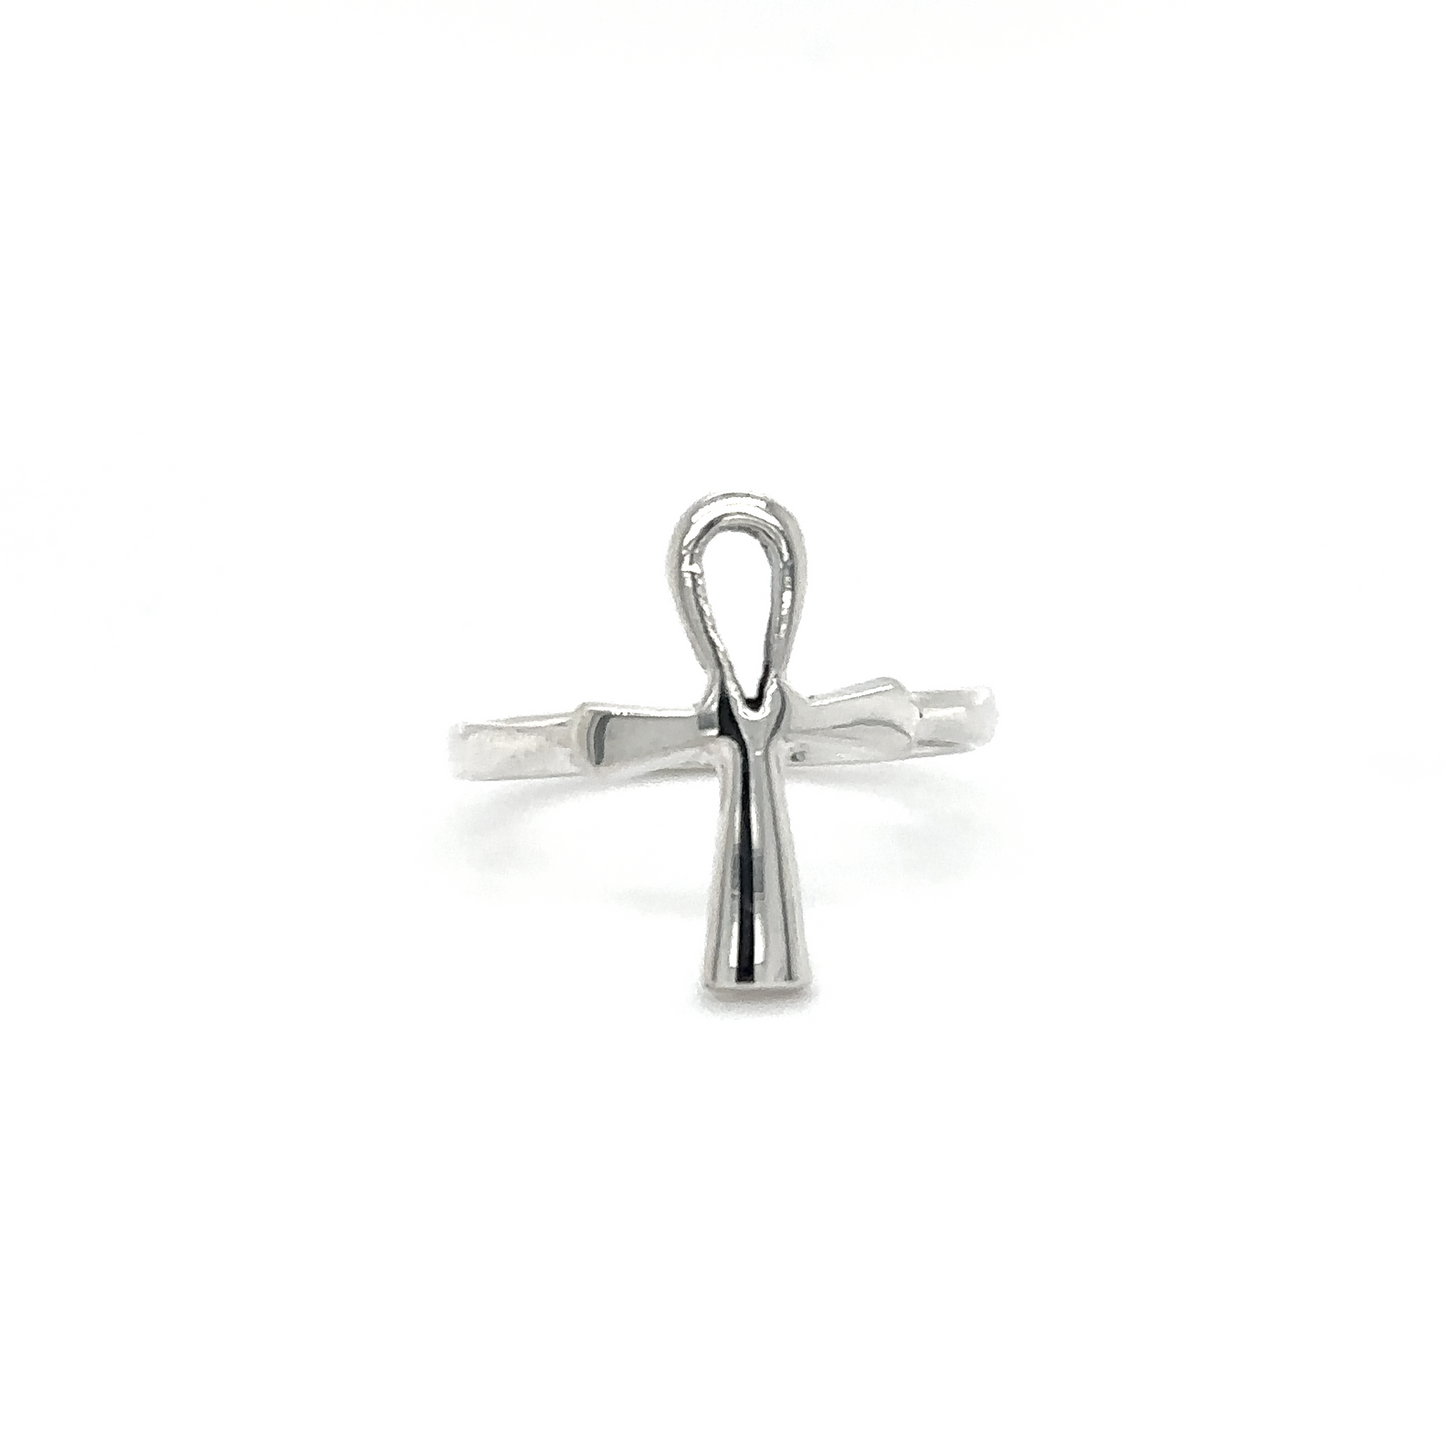 A Super Silver Simple Ankh Ring on a white background.